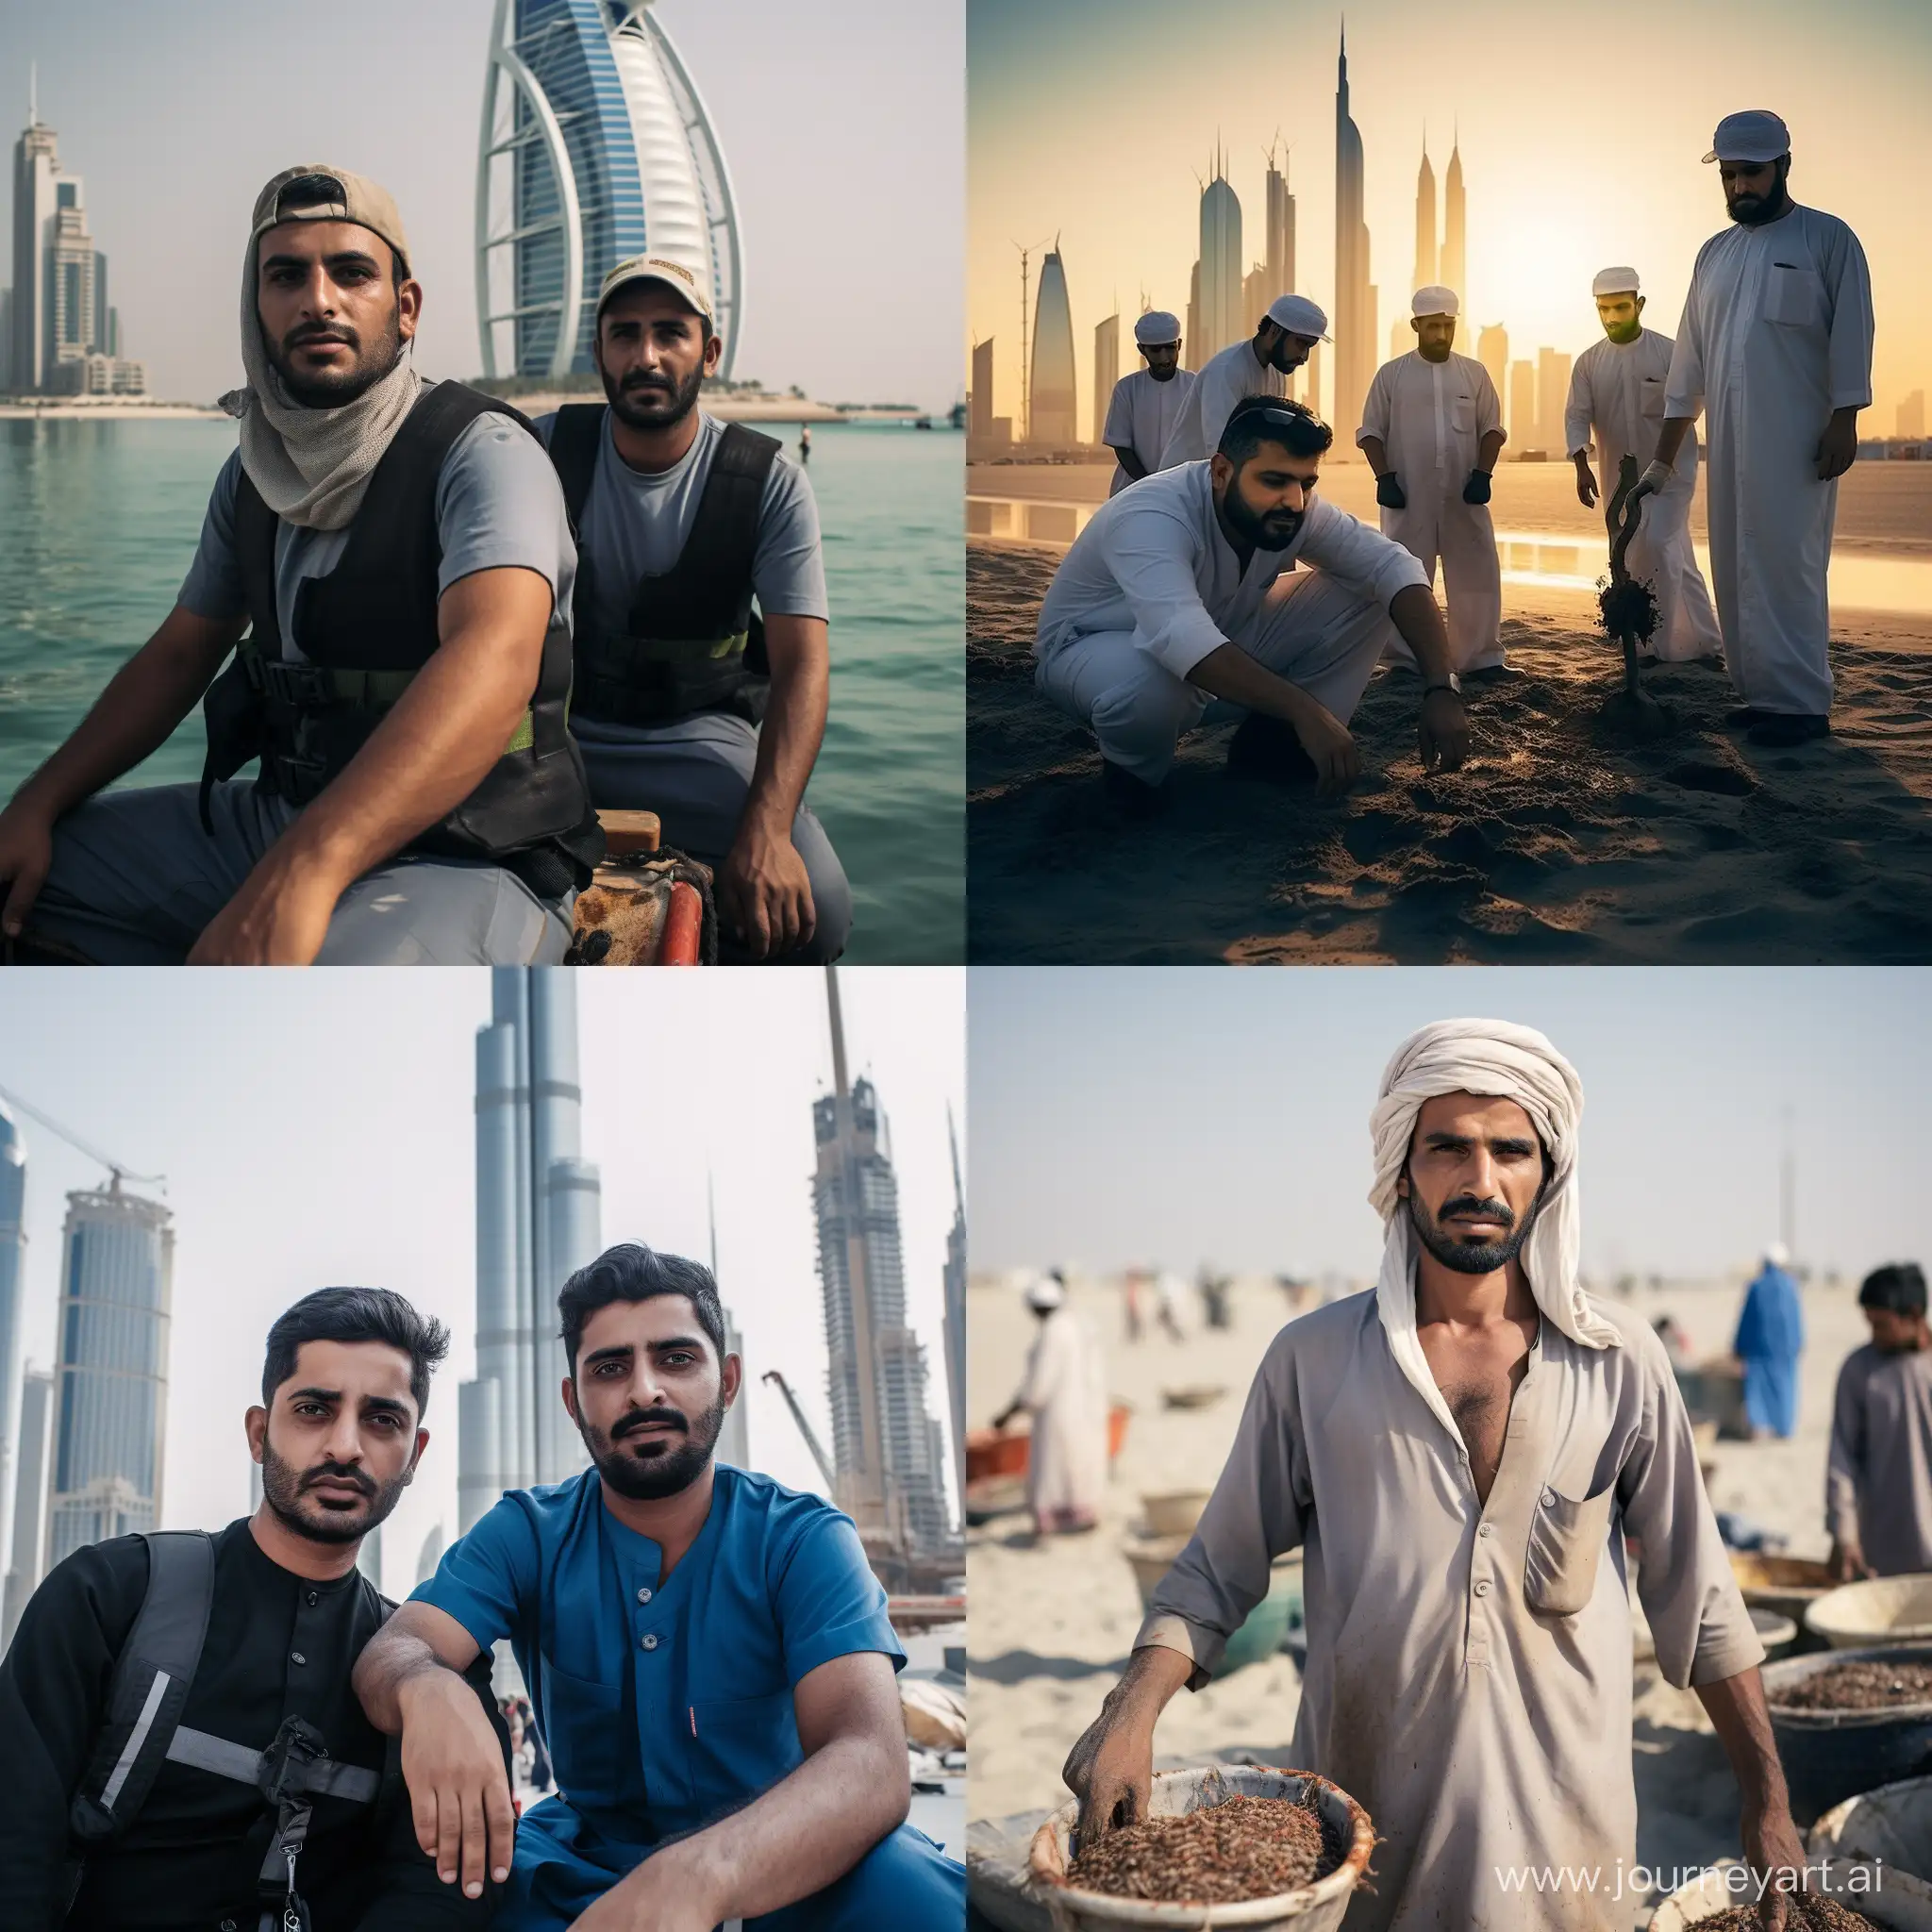 Iranian-Workers-in-Dubai-Candid-Portraits-of-Labor-and-Diversity